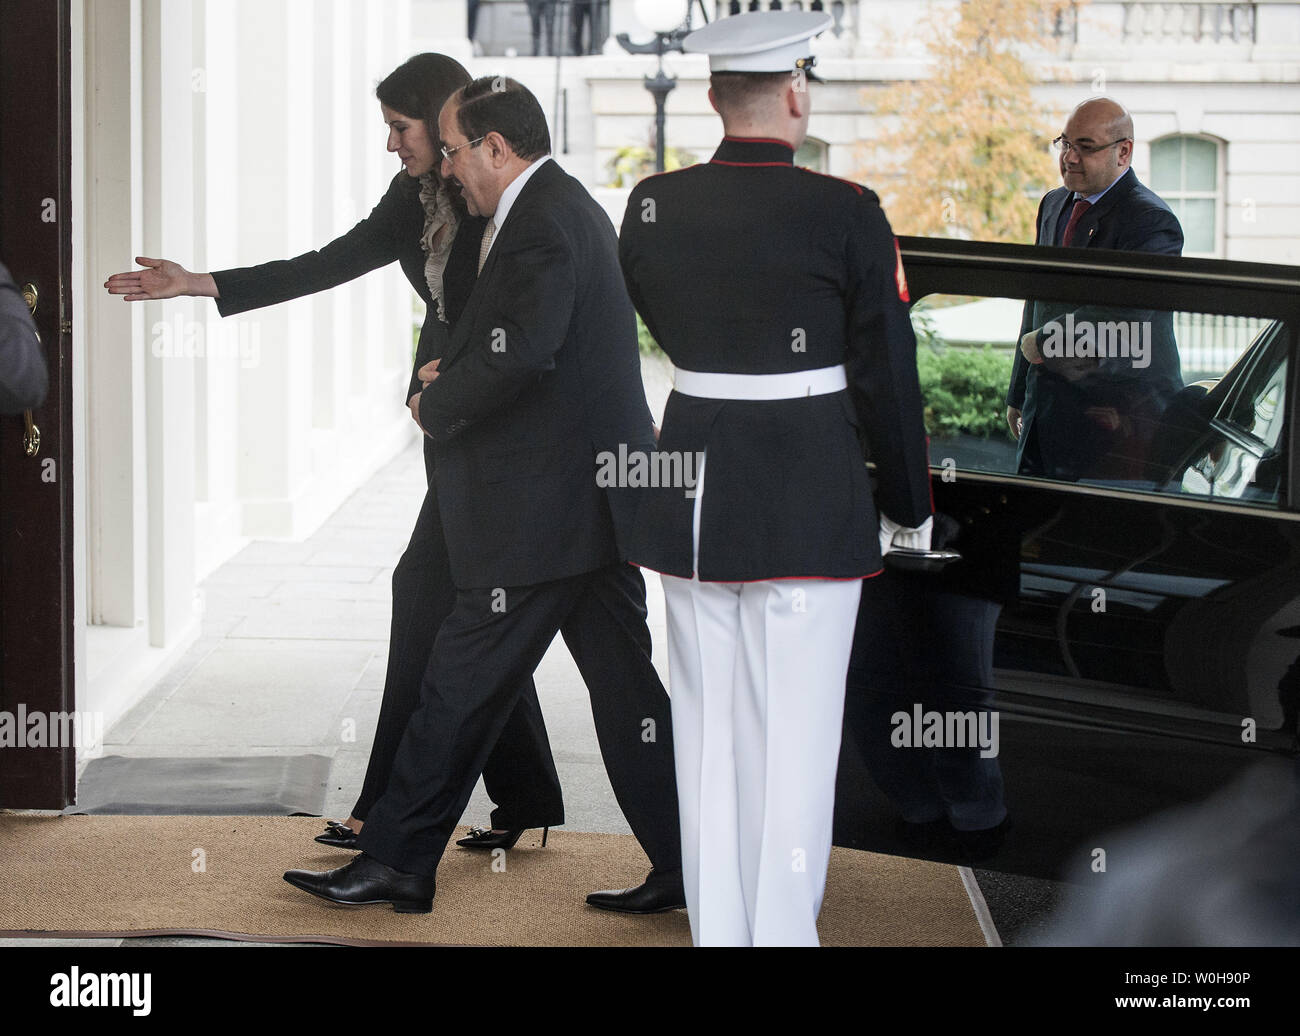 Iraqi Prime Minister Nuri al-Maliki arrives at the White House for a meeting with President Barack Obama in Washington, D.C. on November 1, 2013. UPI/Kevin Dietsch Stock Photo